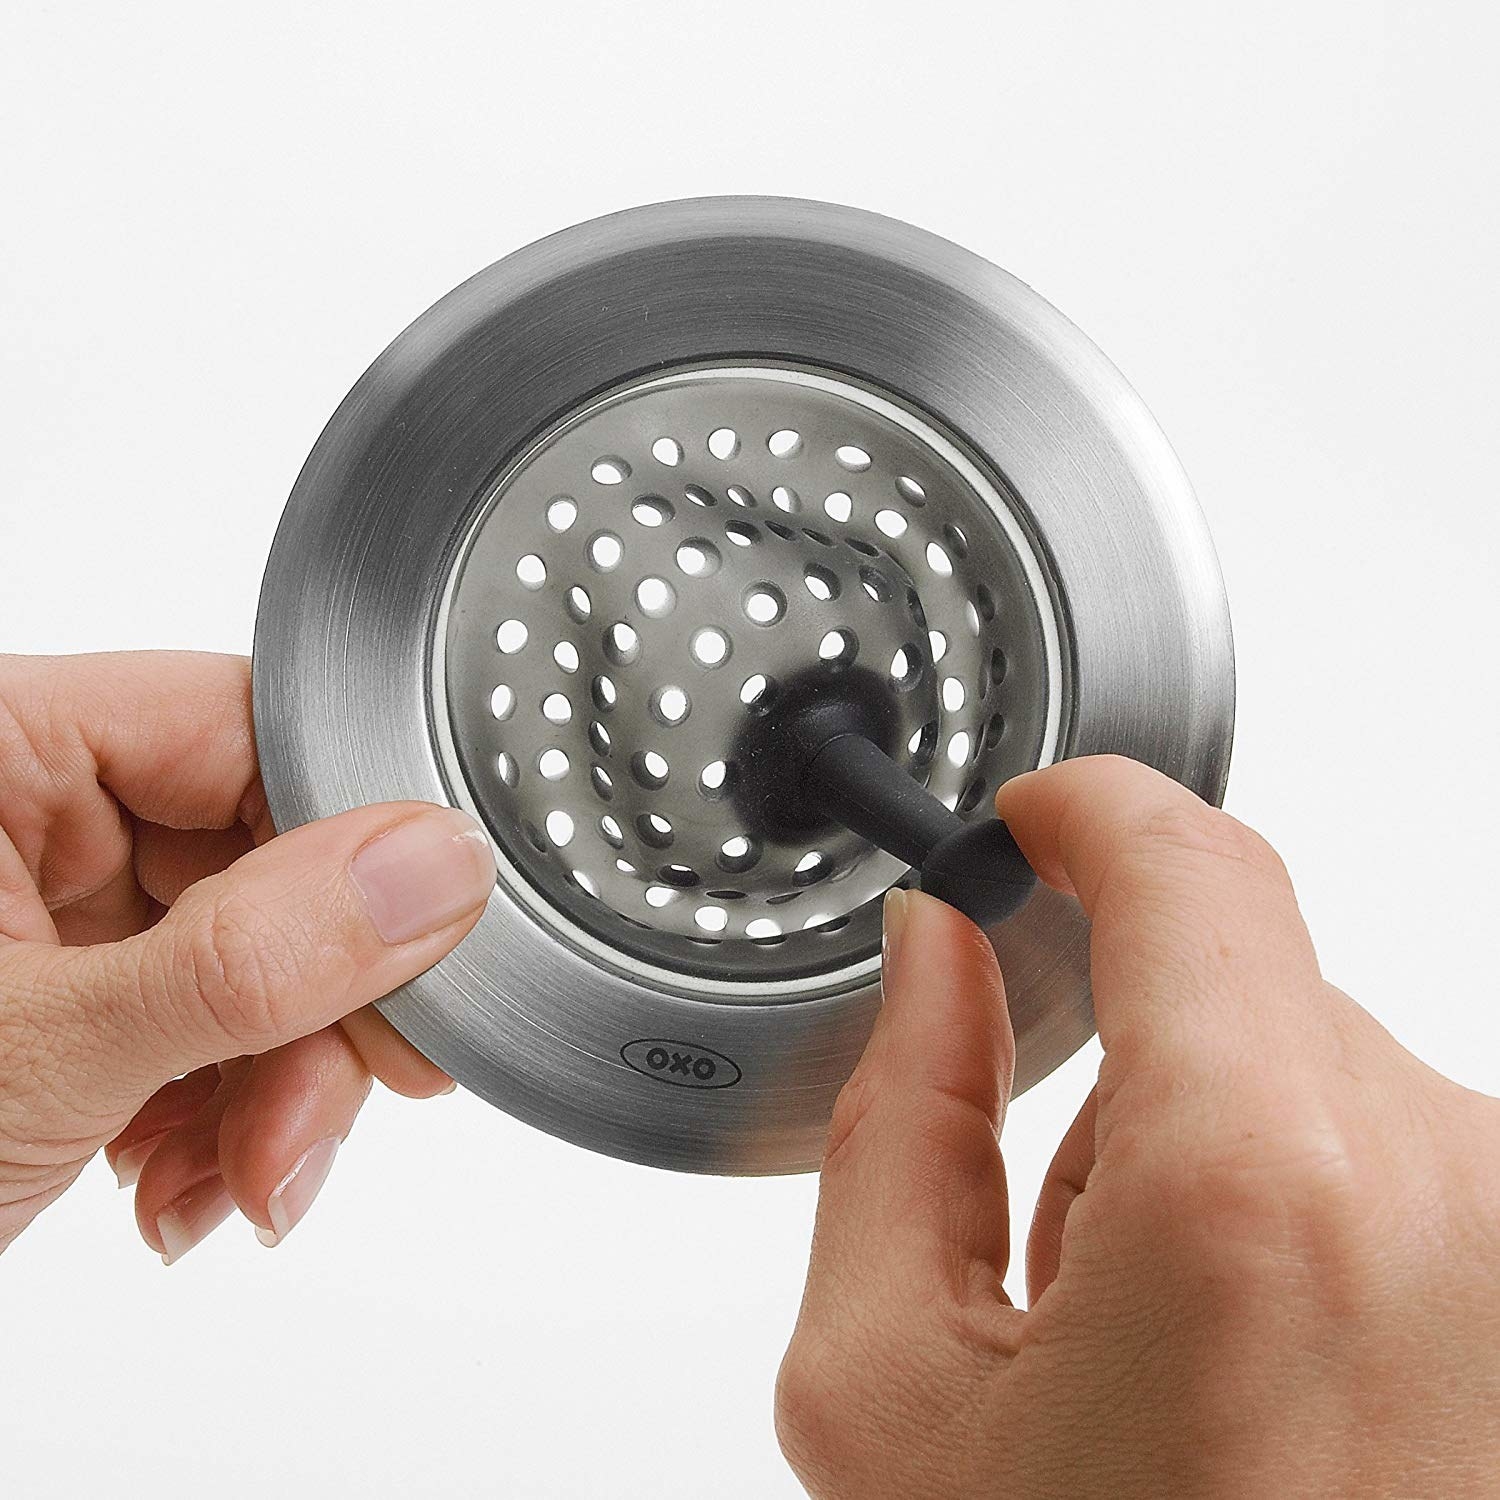 A person flexing the sink strainer